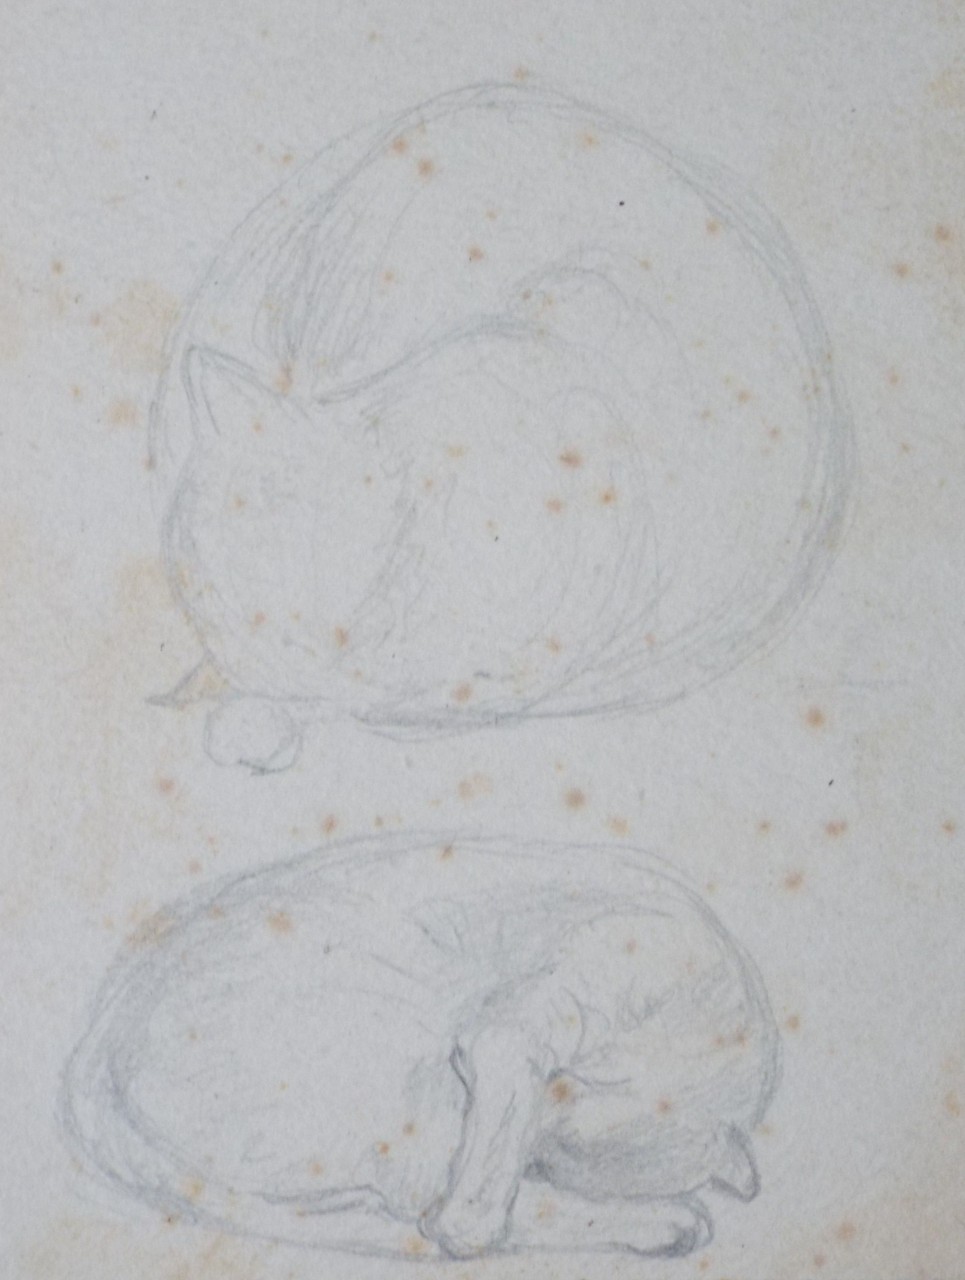 Pencil drawing - Two sketches of sleeping cats